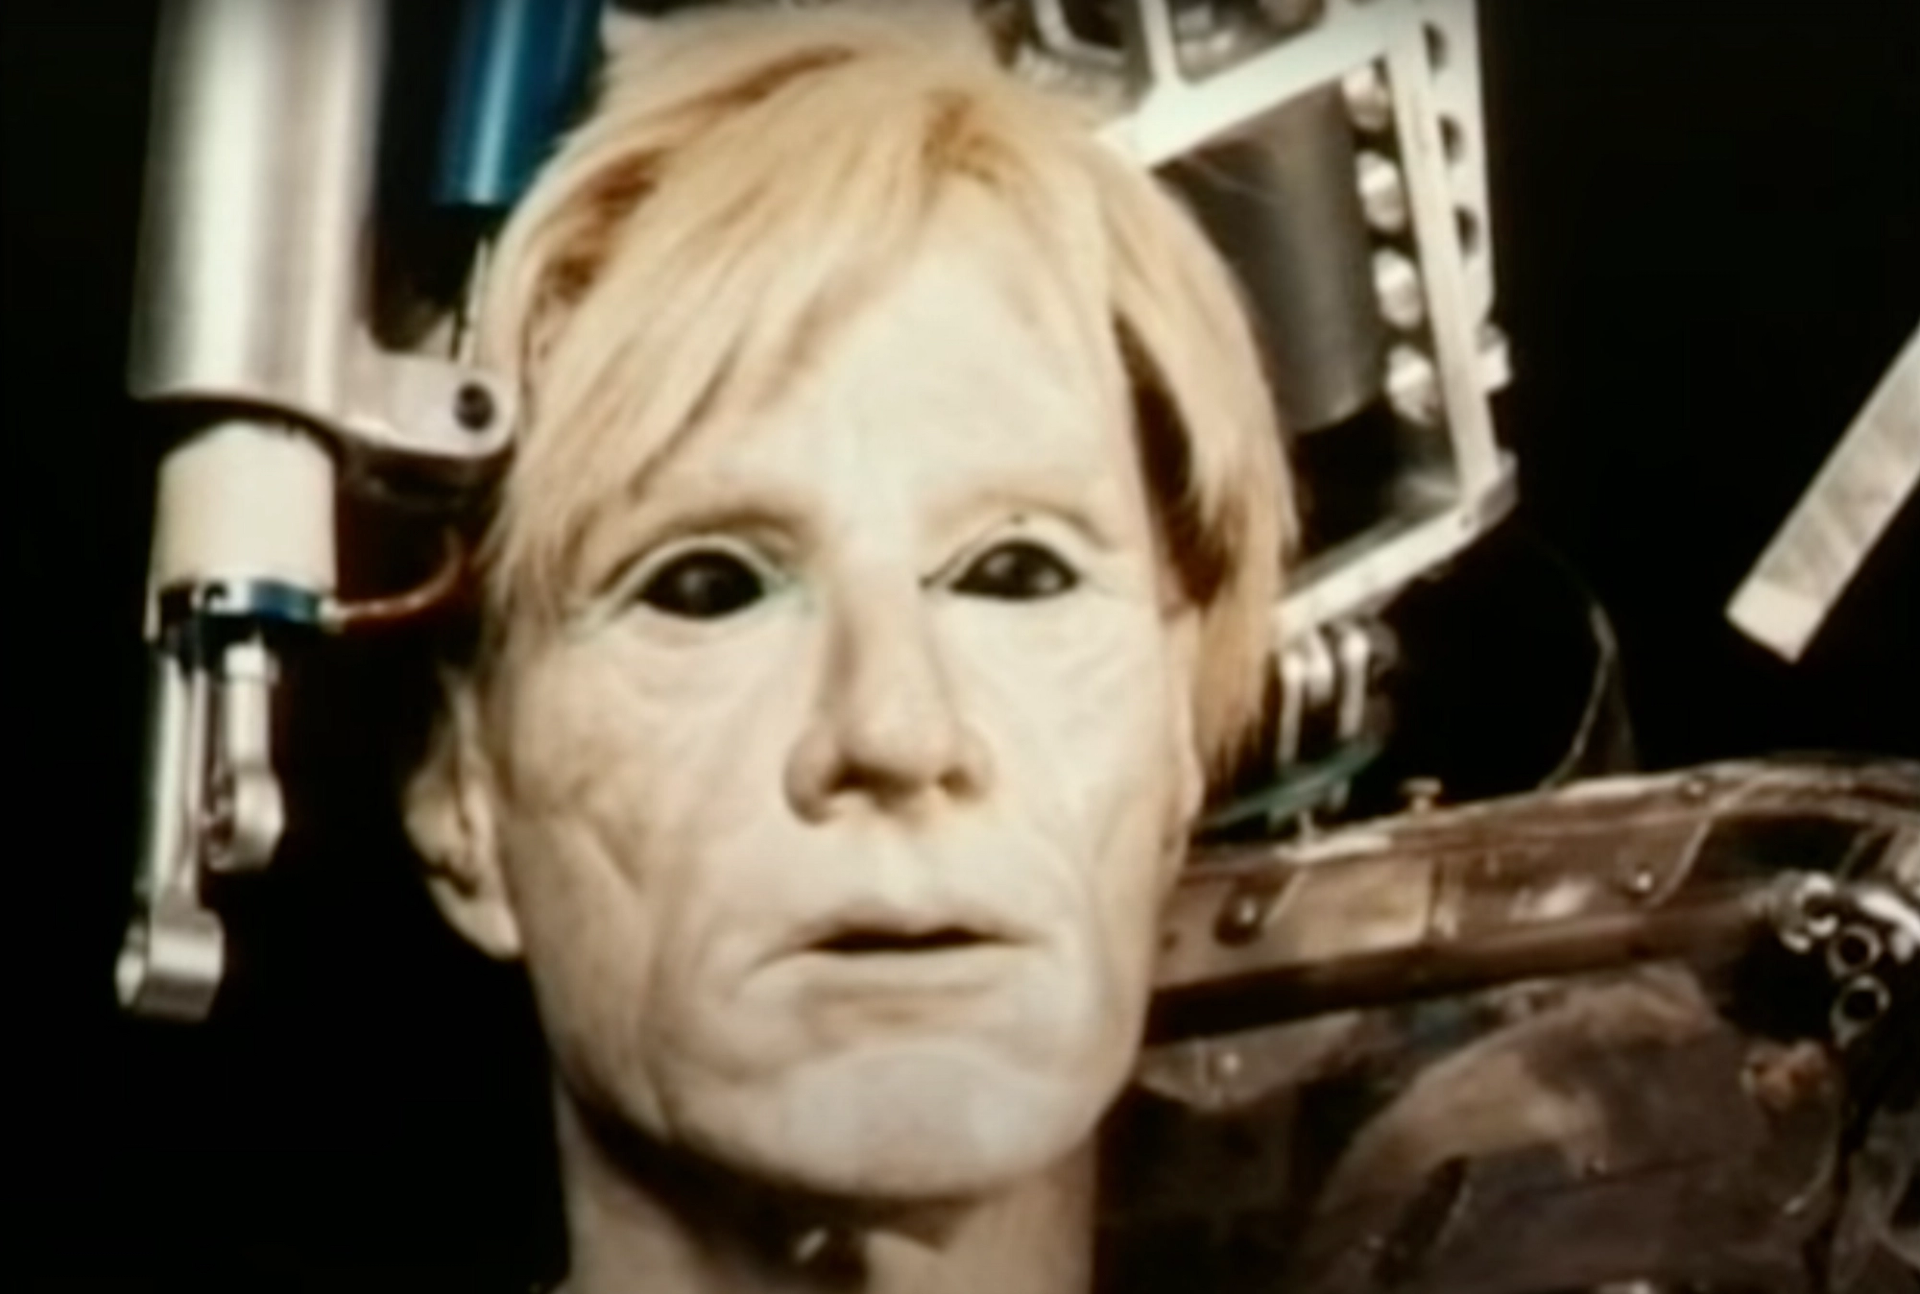 A screenshot of a video showing the face of Andy Warhol's 1981 Robot, in the likeness of the artist.